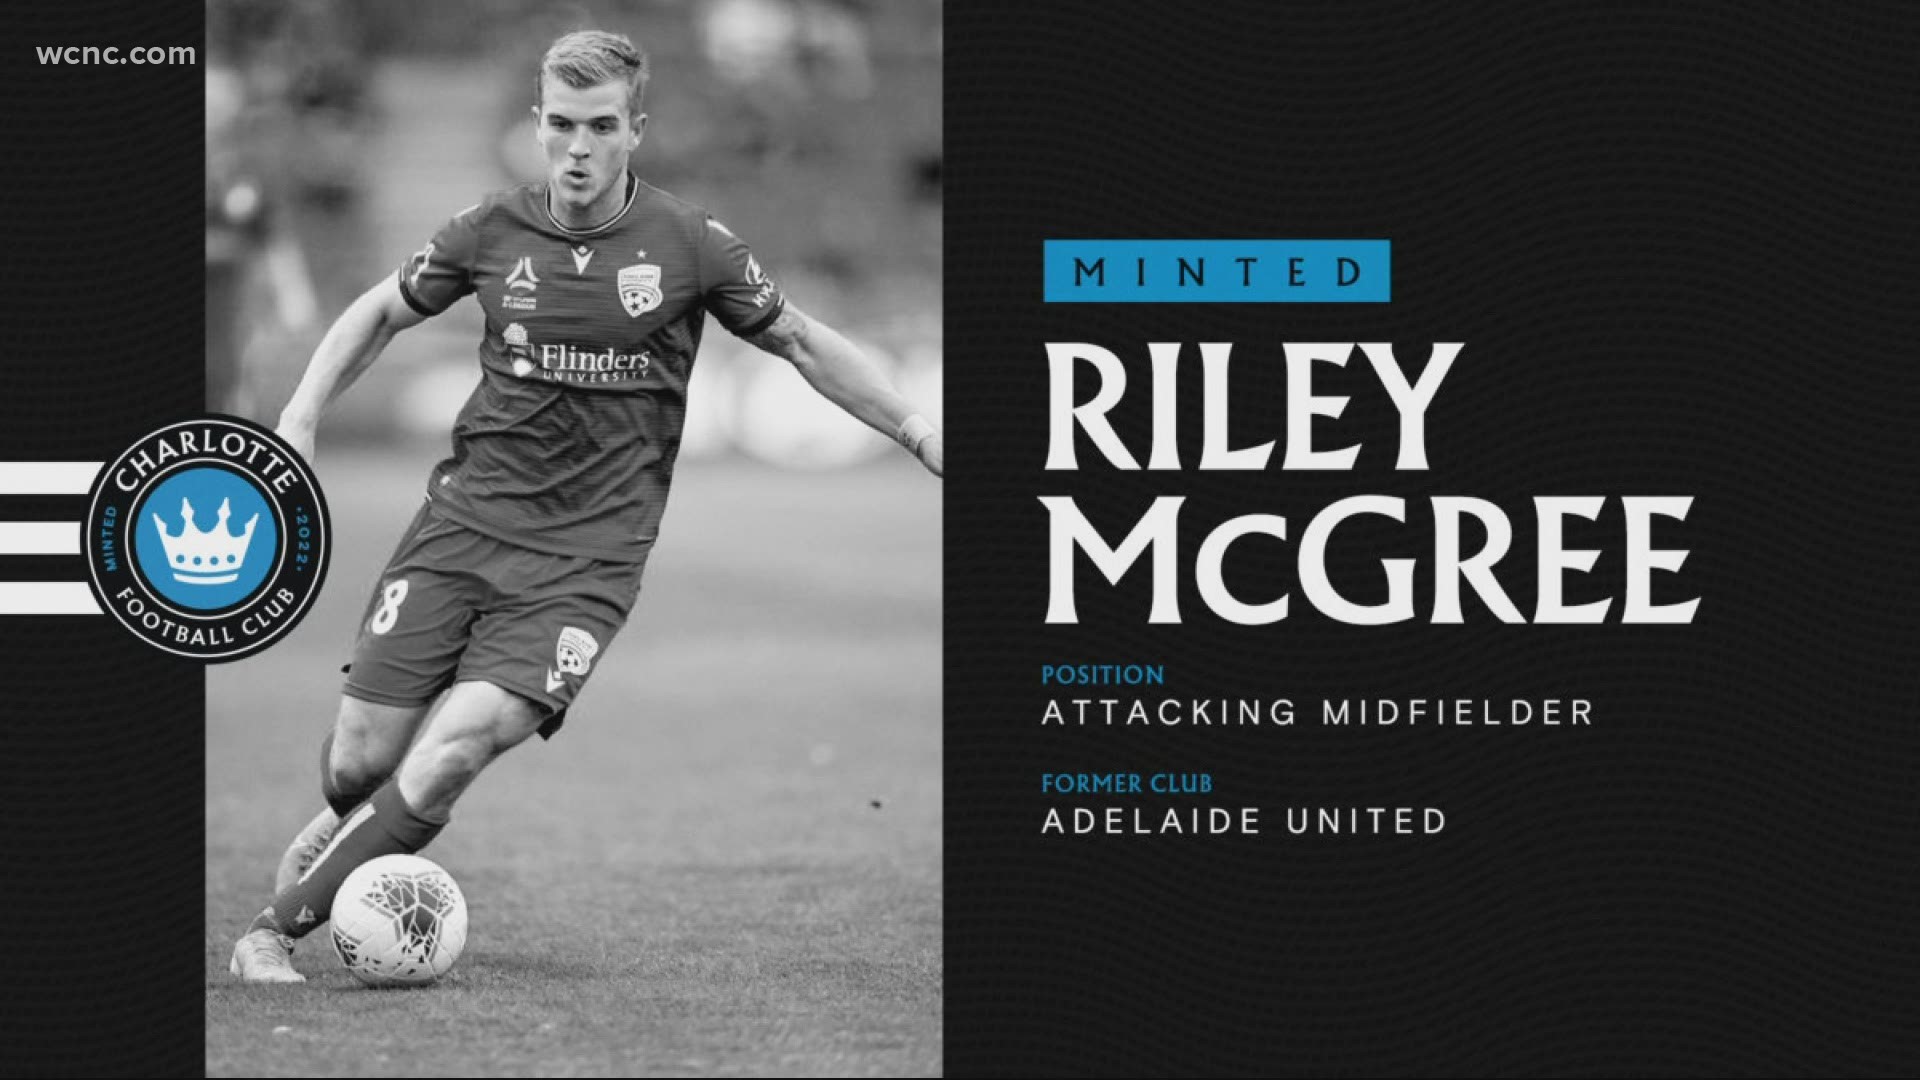 Riley McGree, 21, is an attacking midfielder from Australia.